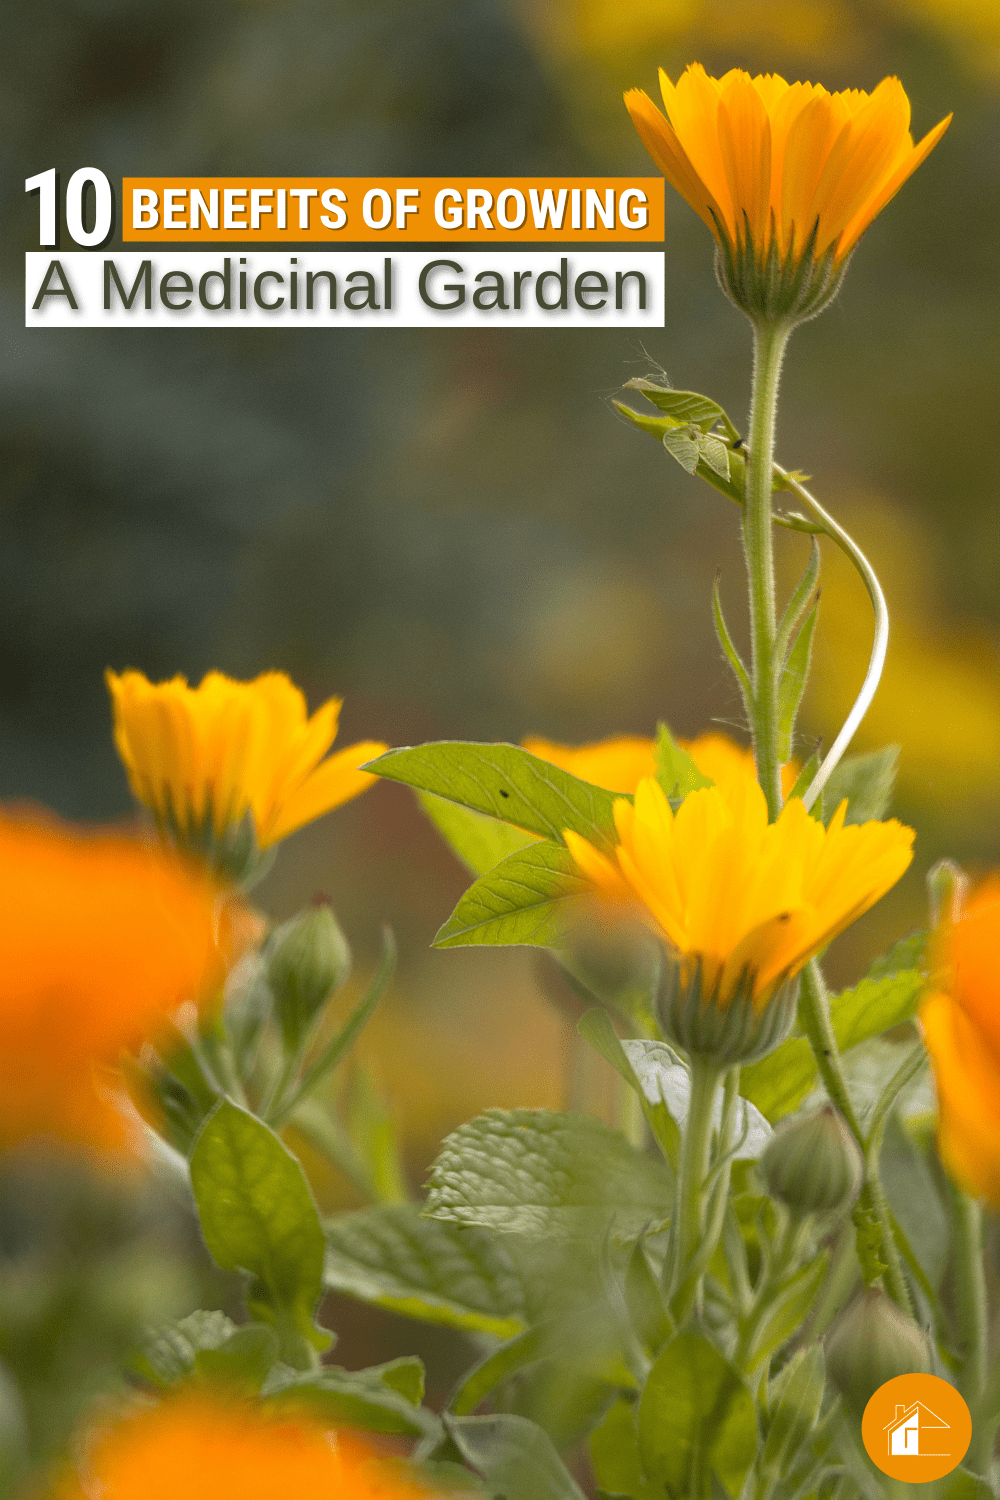 Get the best out of your garden this season! Learn what medicinal gardens can do for you, plus the top ten benefits of growing one. via @mystayathome